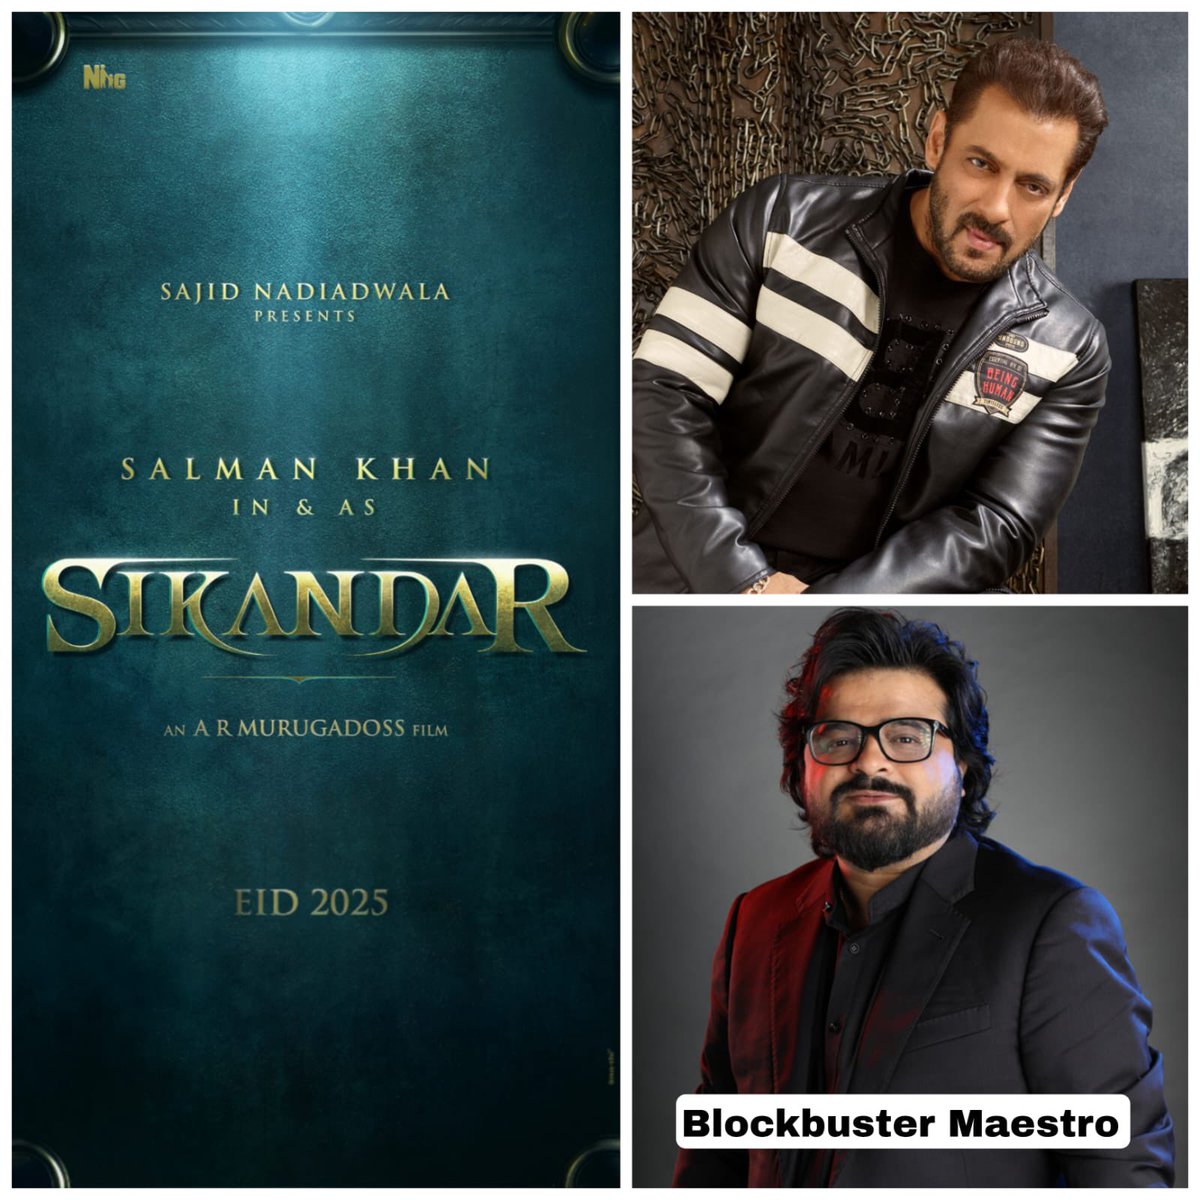 #SIKANDAR musical chords will be designed by #PritamChakraborty ! After the titans like #SalmanKhan, #SajidNadiadwala, and @ARMurugados, this one is yet another big name joining the mega project 💫 Get ready for SIKANDAR in cinemas near you on EID 2025! @NGEMovies